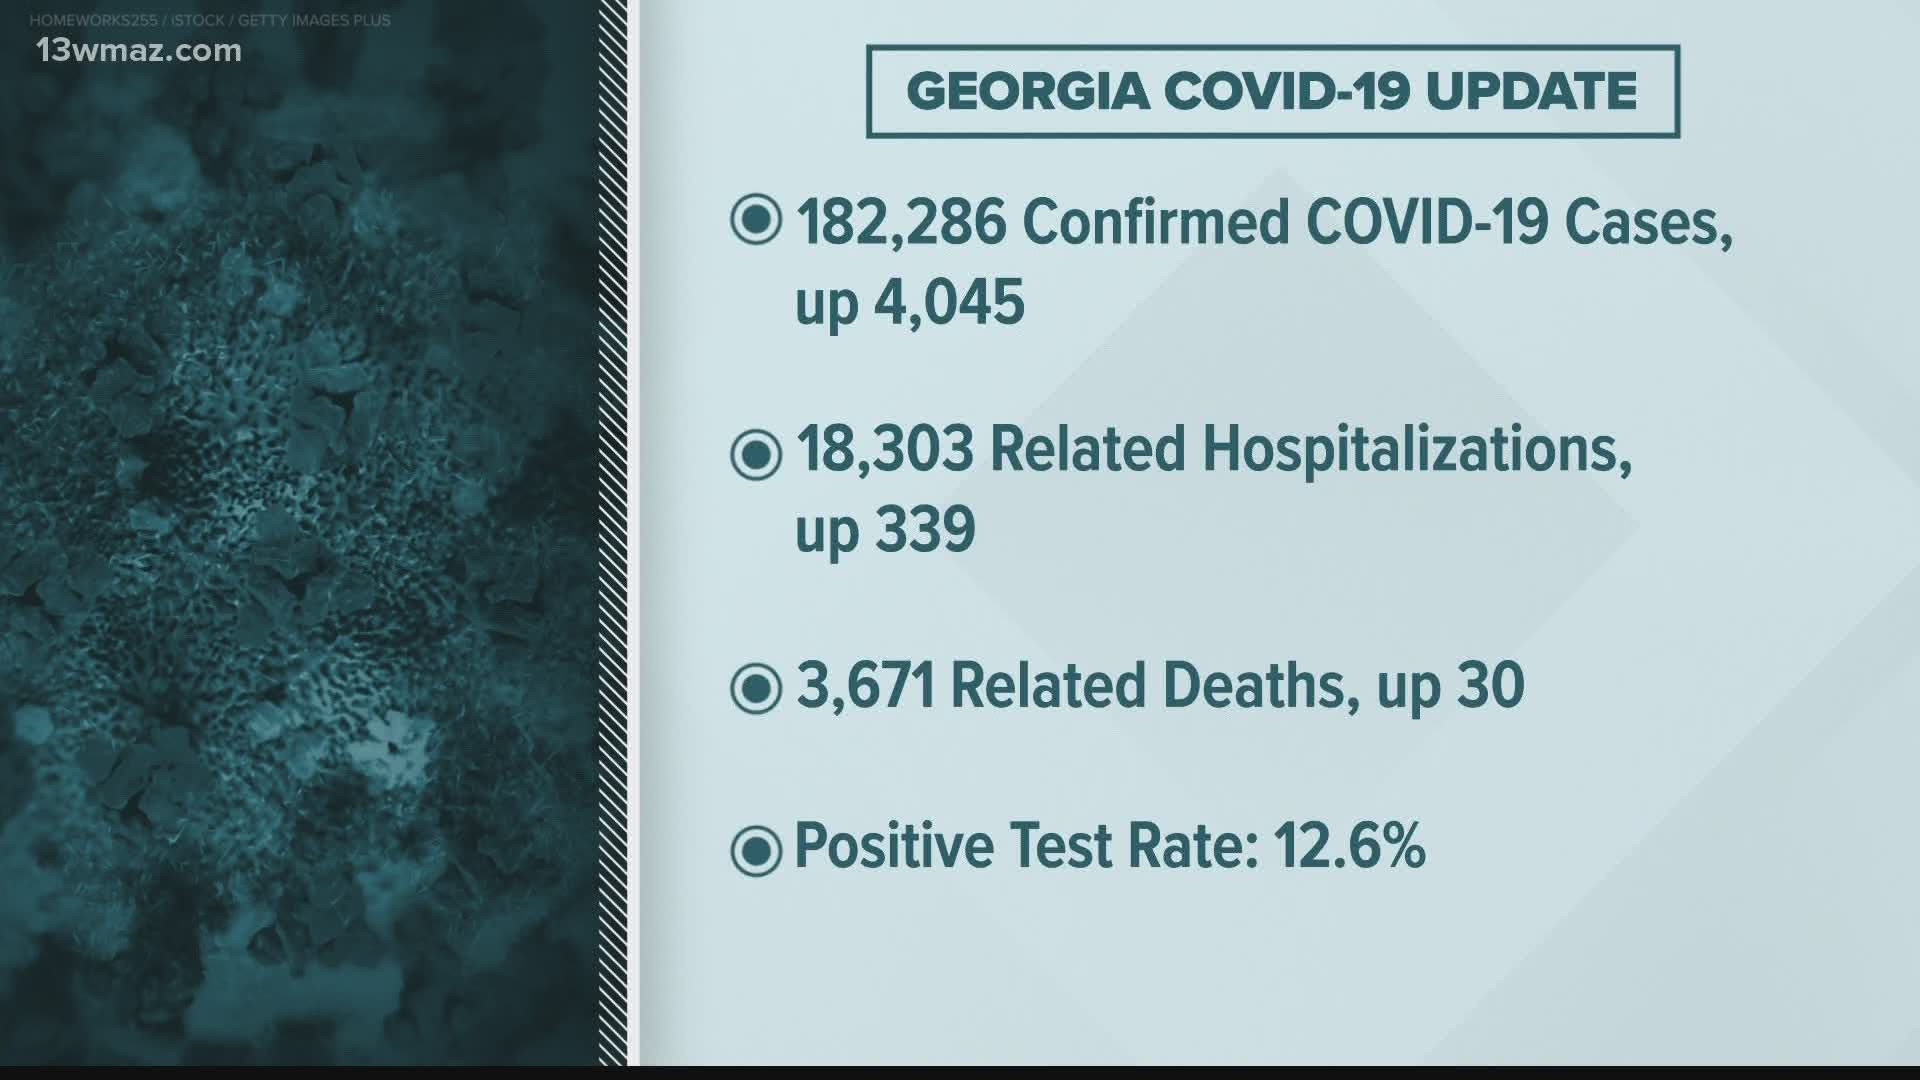 We are continuing to see a rise in COVID-19 cases across the state.